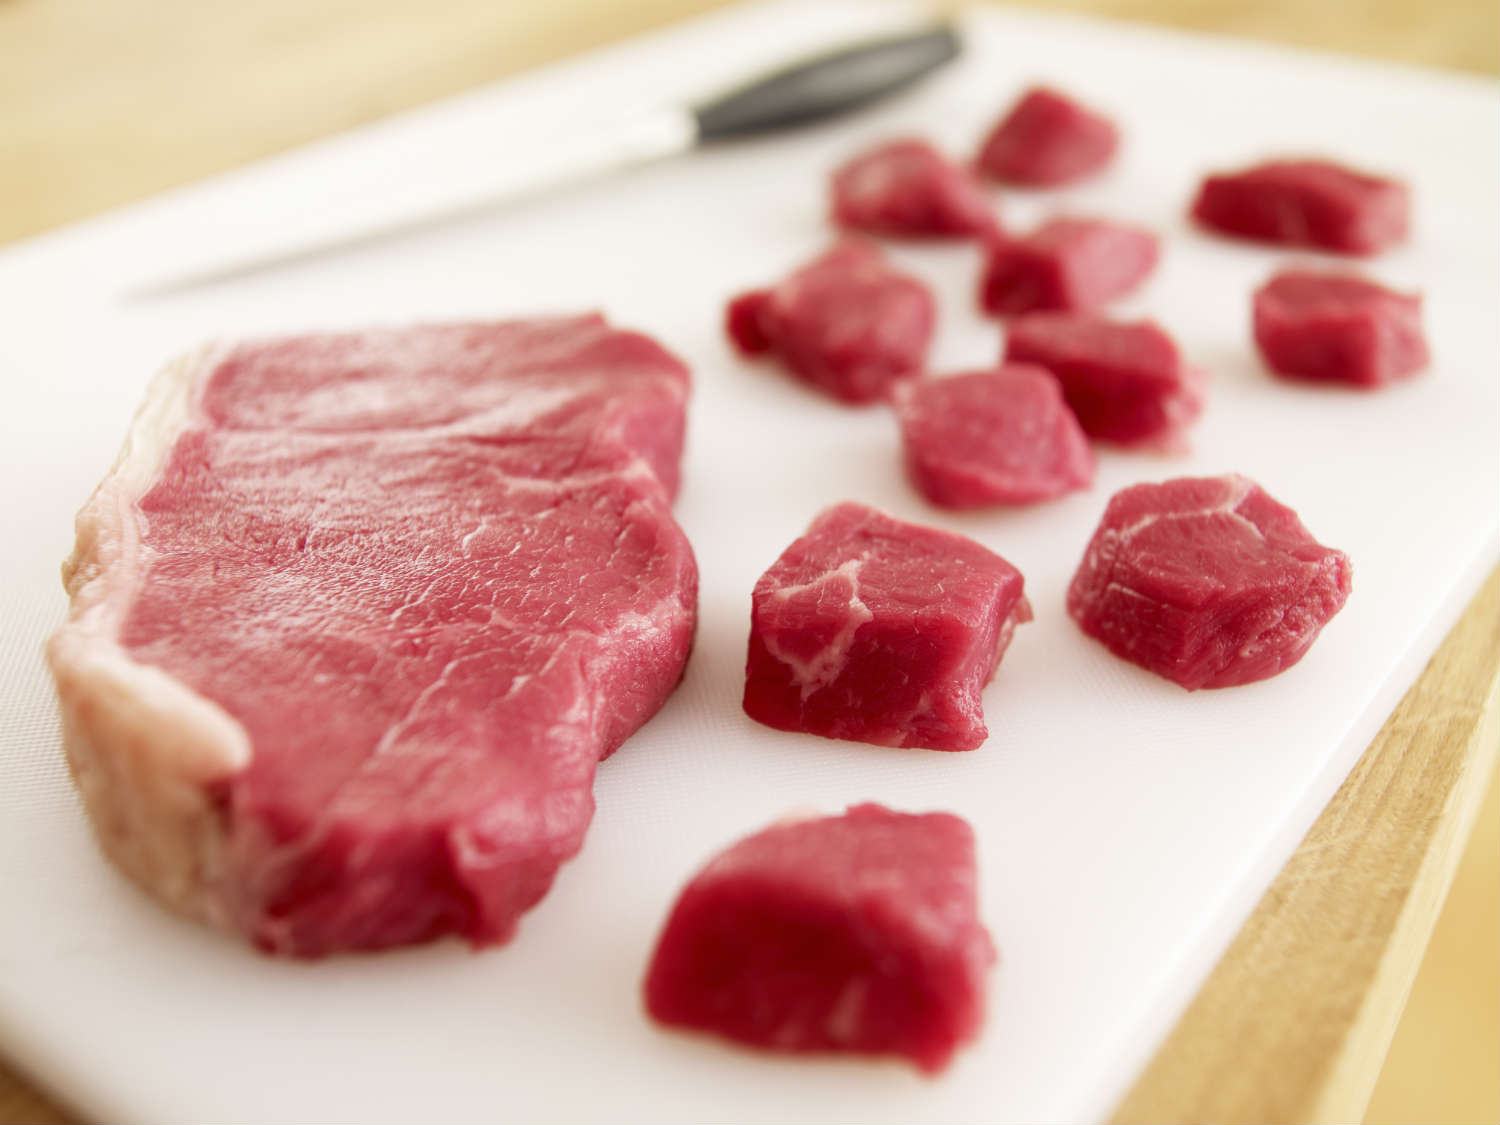 Steak—it's not so bad for you (OJO Images via Getty Images)